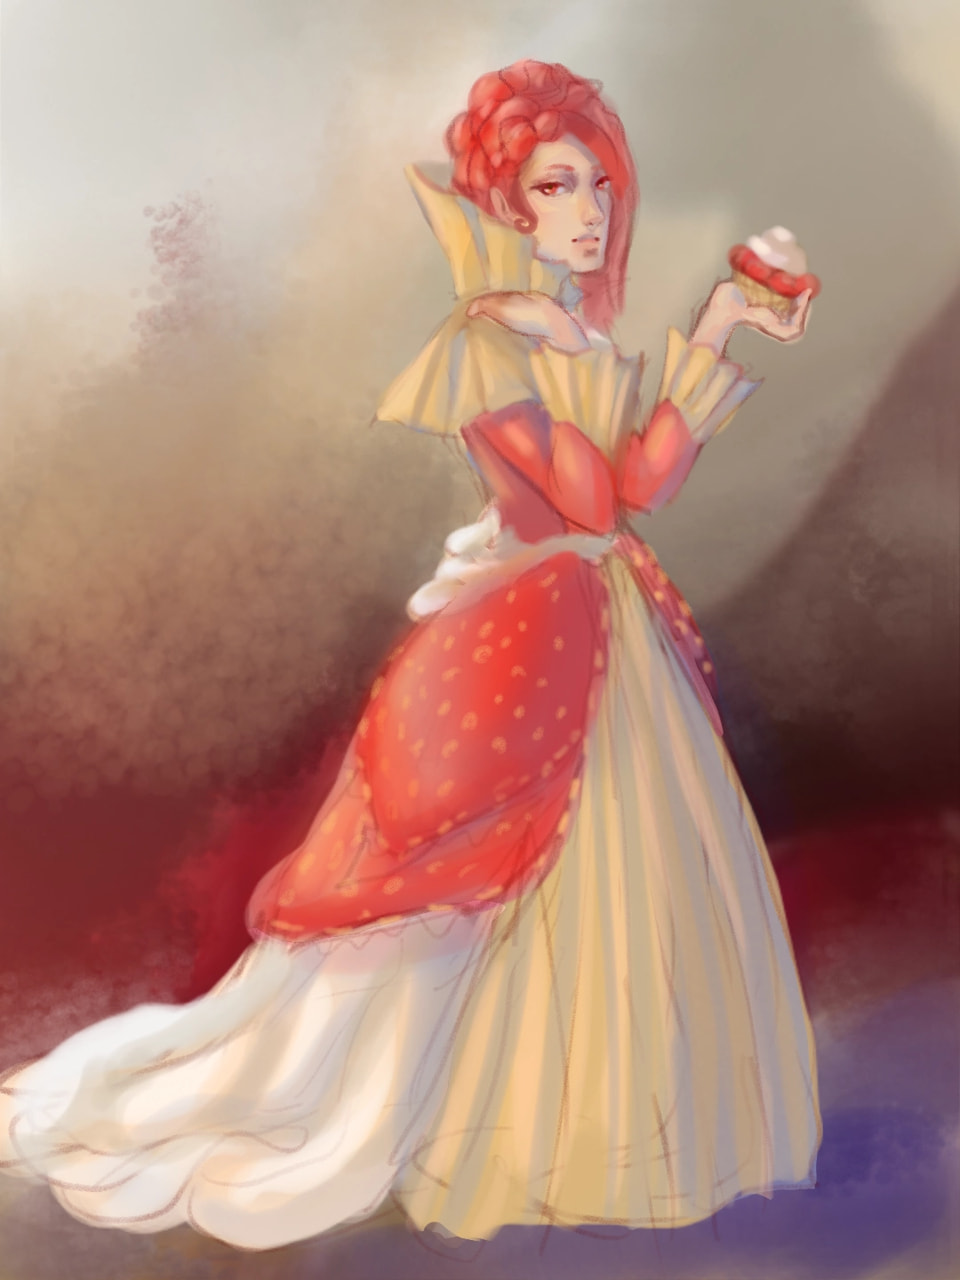 Here's my entry for the #foodchallenge This is the personification of a strawberry tart. #fridayswithsketch